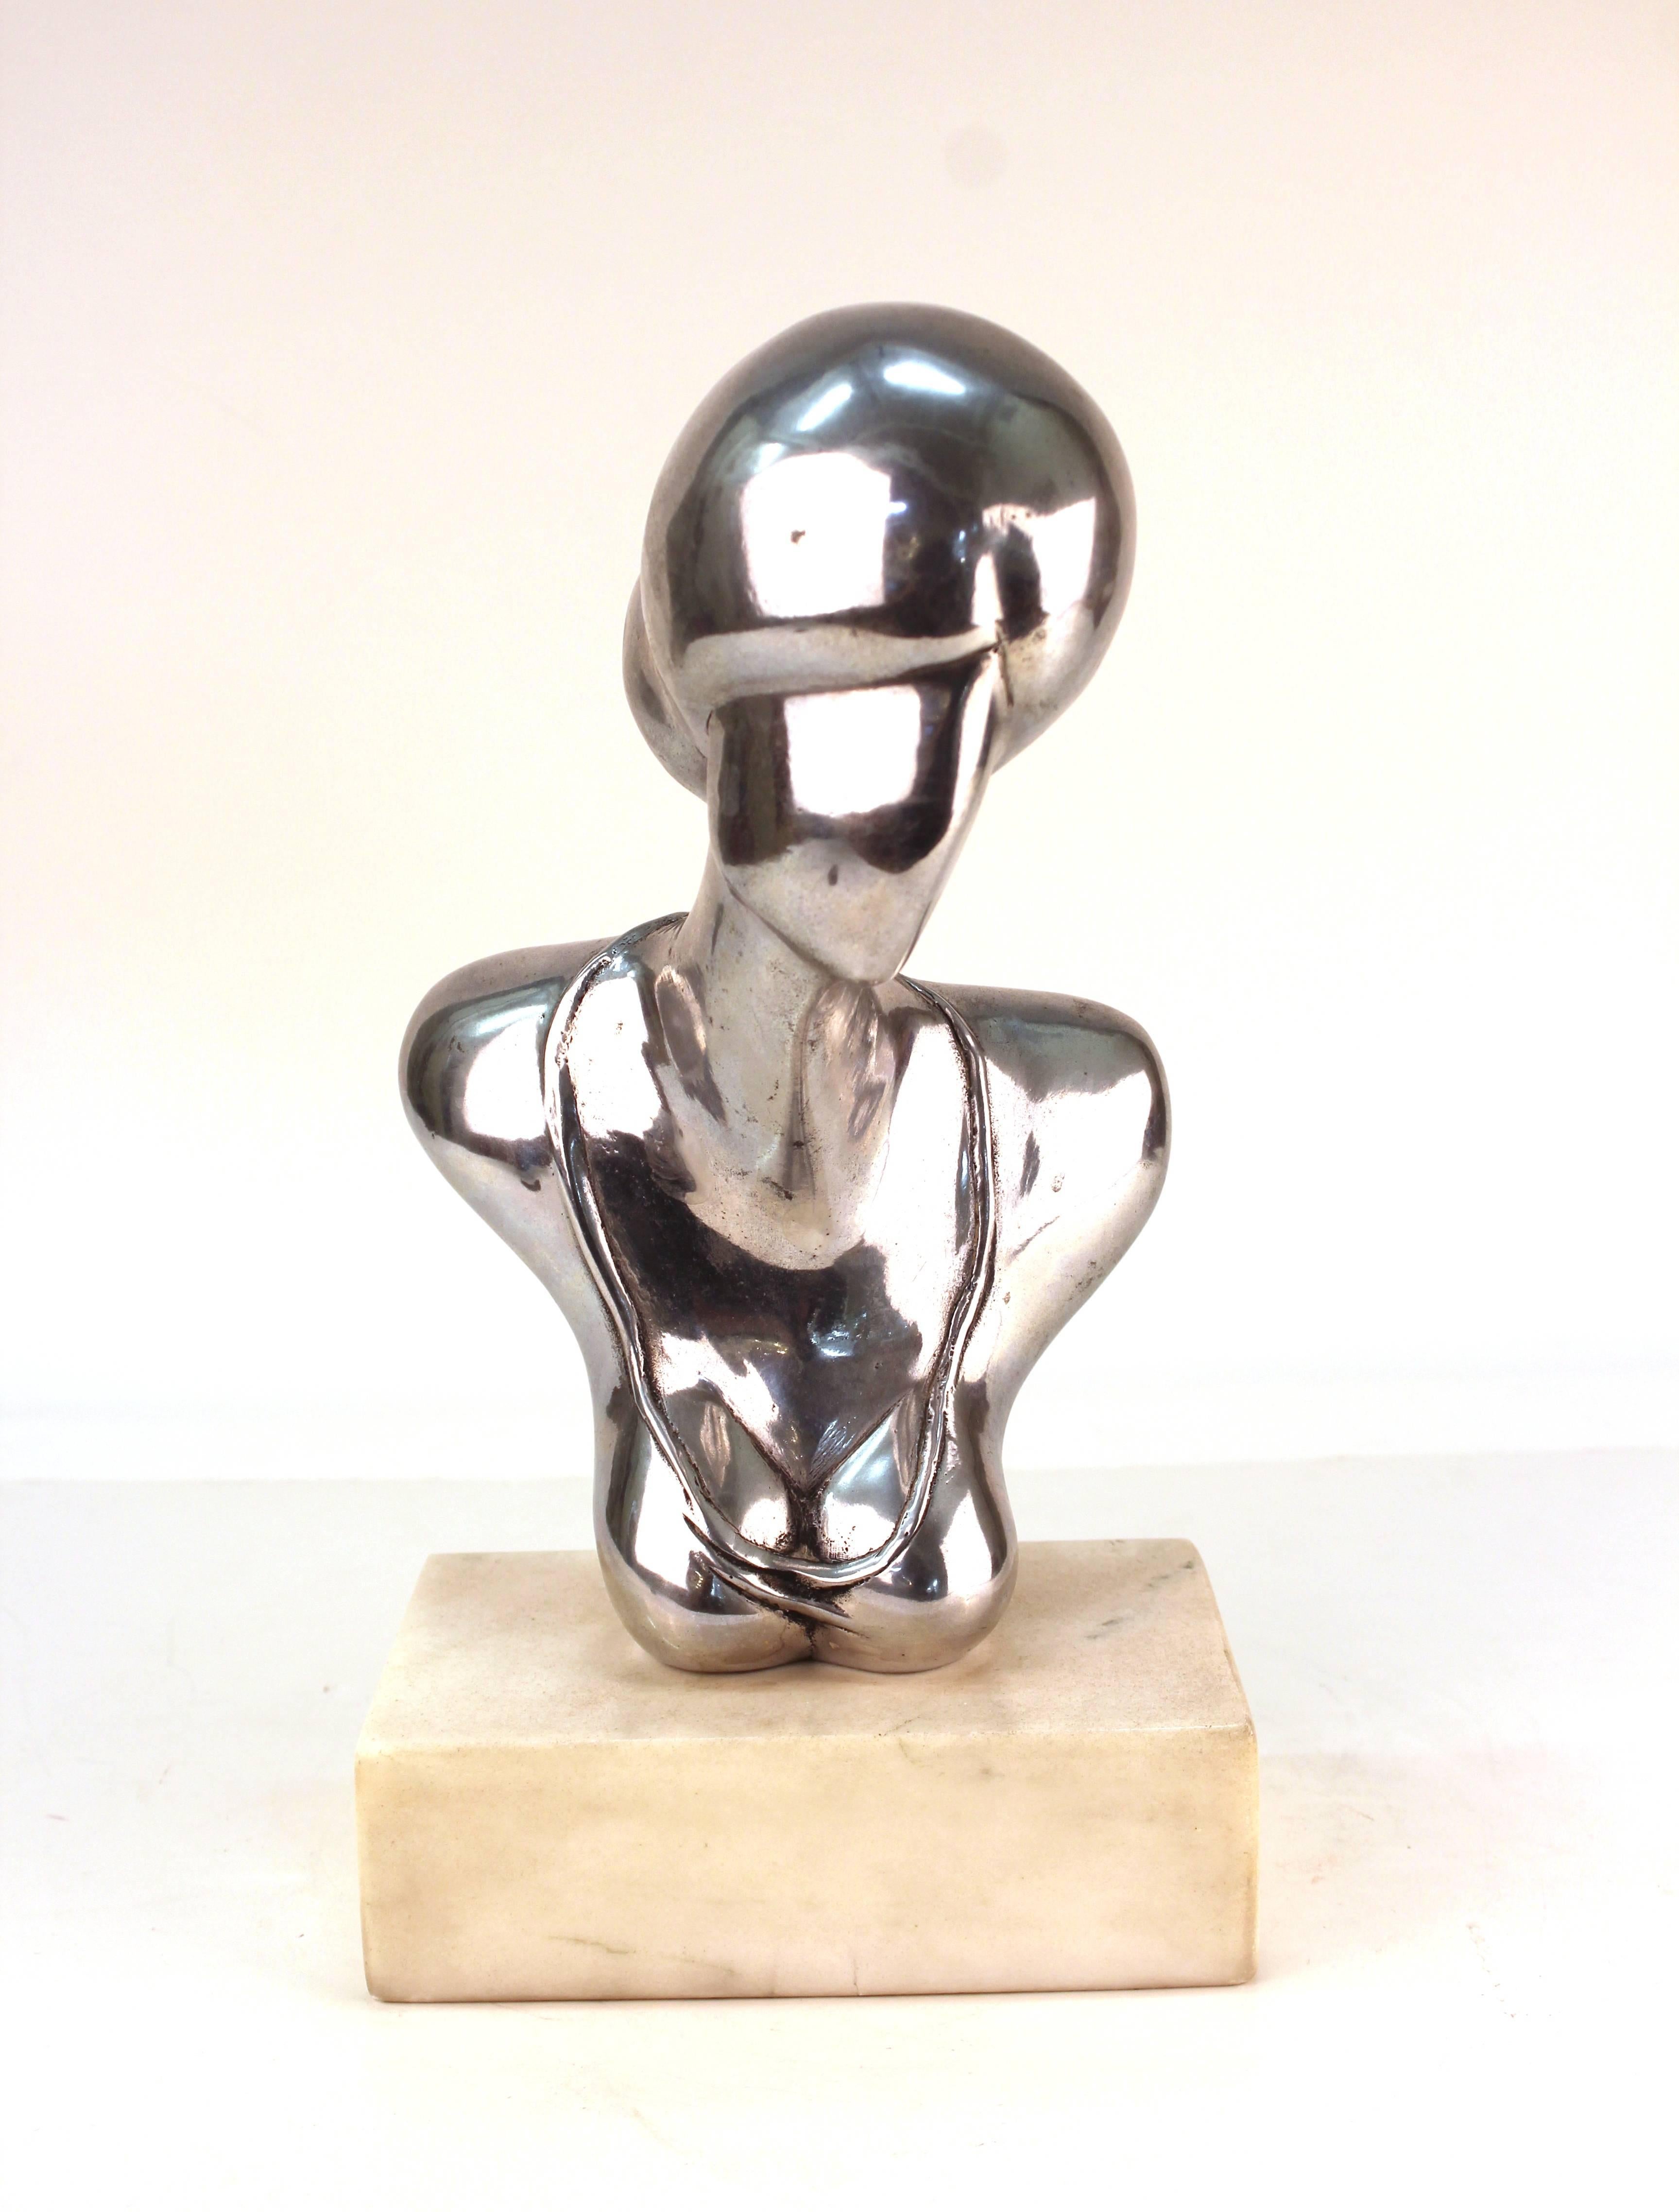 A nickel-plated bronze sculpture by Edward J. Walsh (b. 1944, American) of a female bust atop a white marble base. Signed [EWJ] and numbered on the back. The piece is from the 1970s and is in good vintage condition.